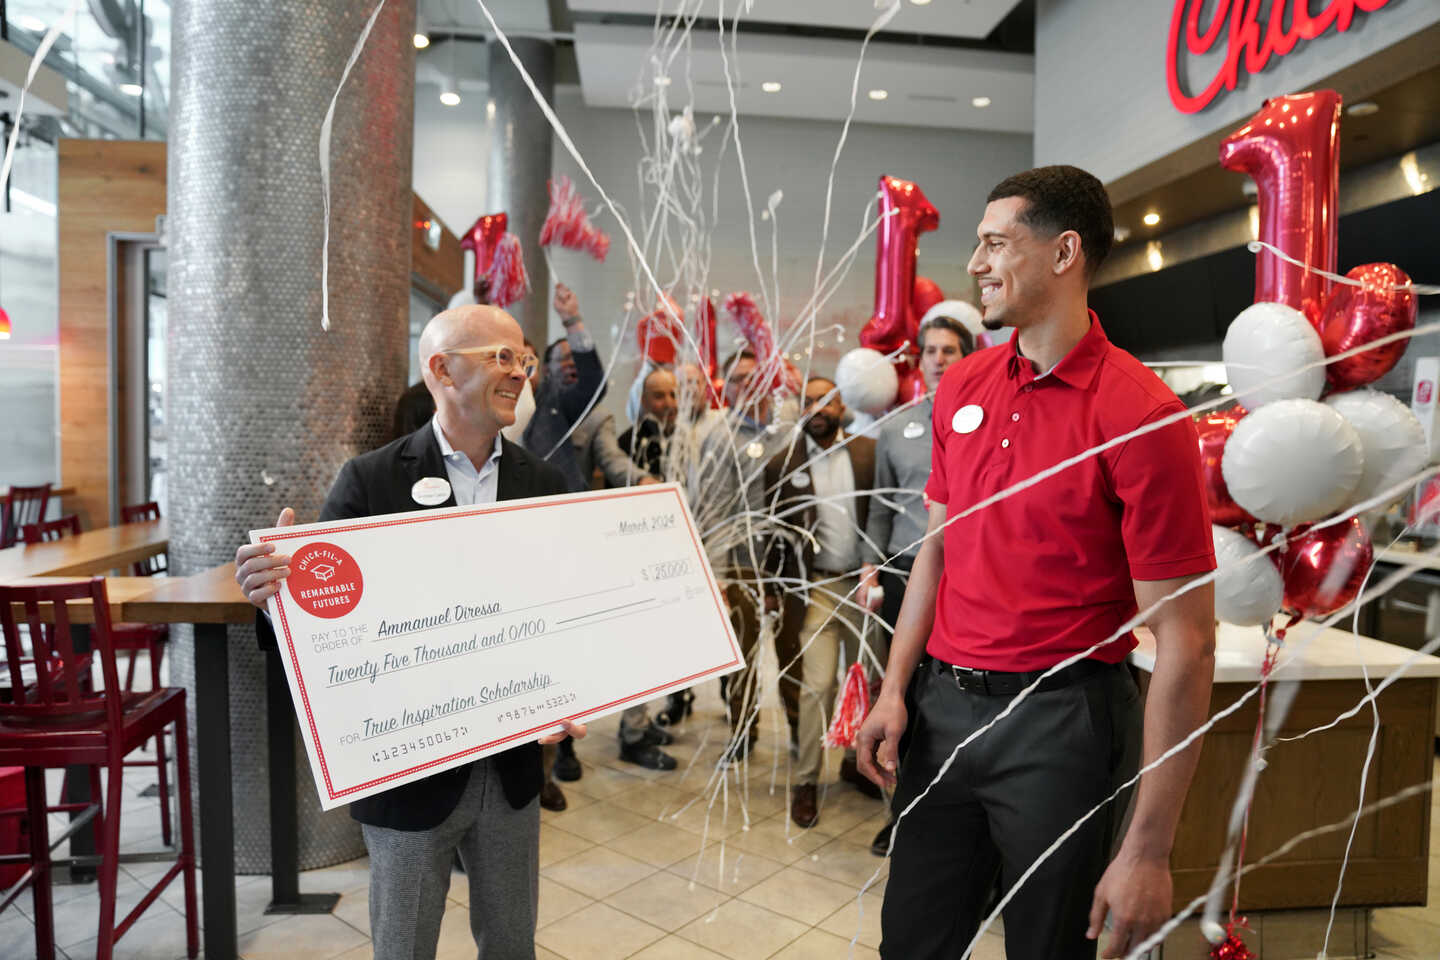 Chick-fil-A President Andrew Cathy handing a scholarship check to Ammanuel Diressa, the first Canadian True Inspiration Scholar.